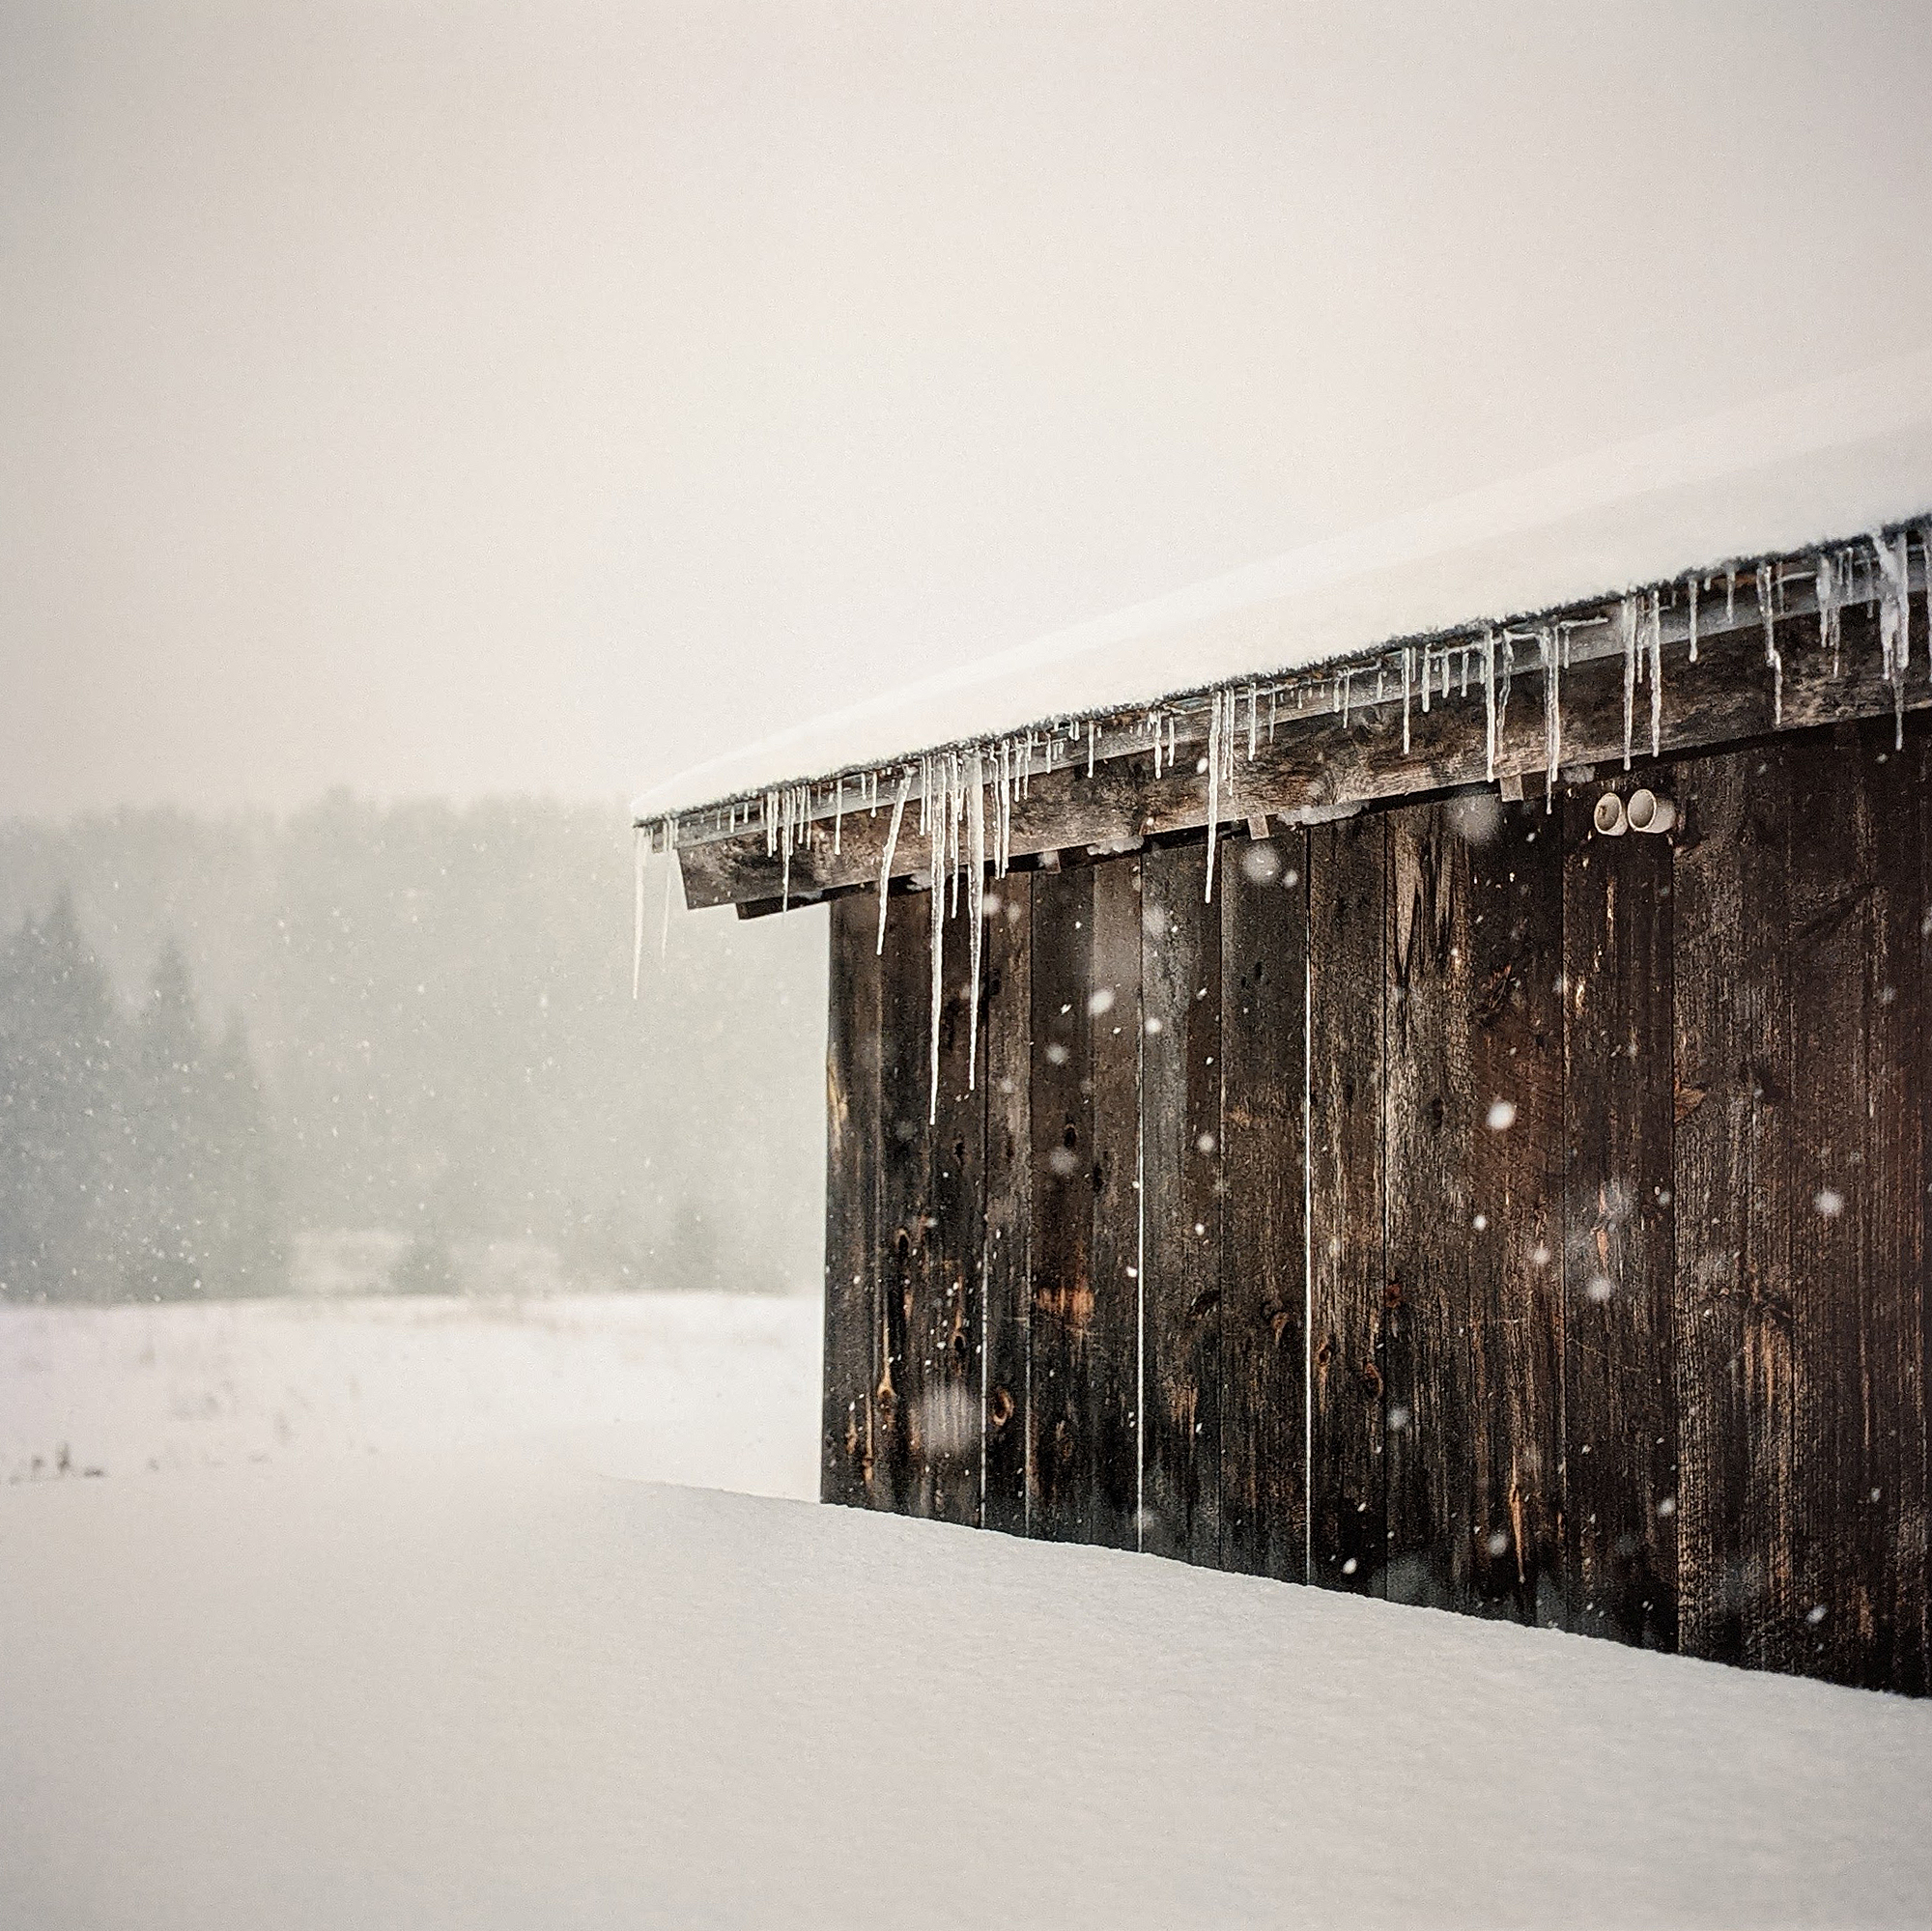 photograph of a barn in winter by Thad Russell